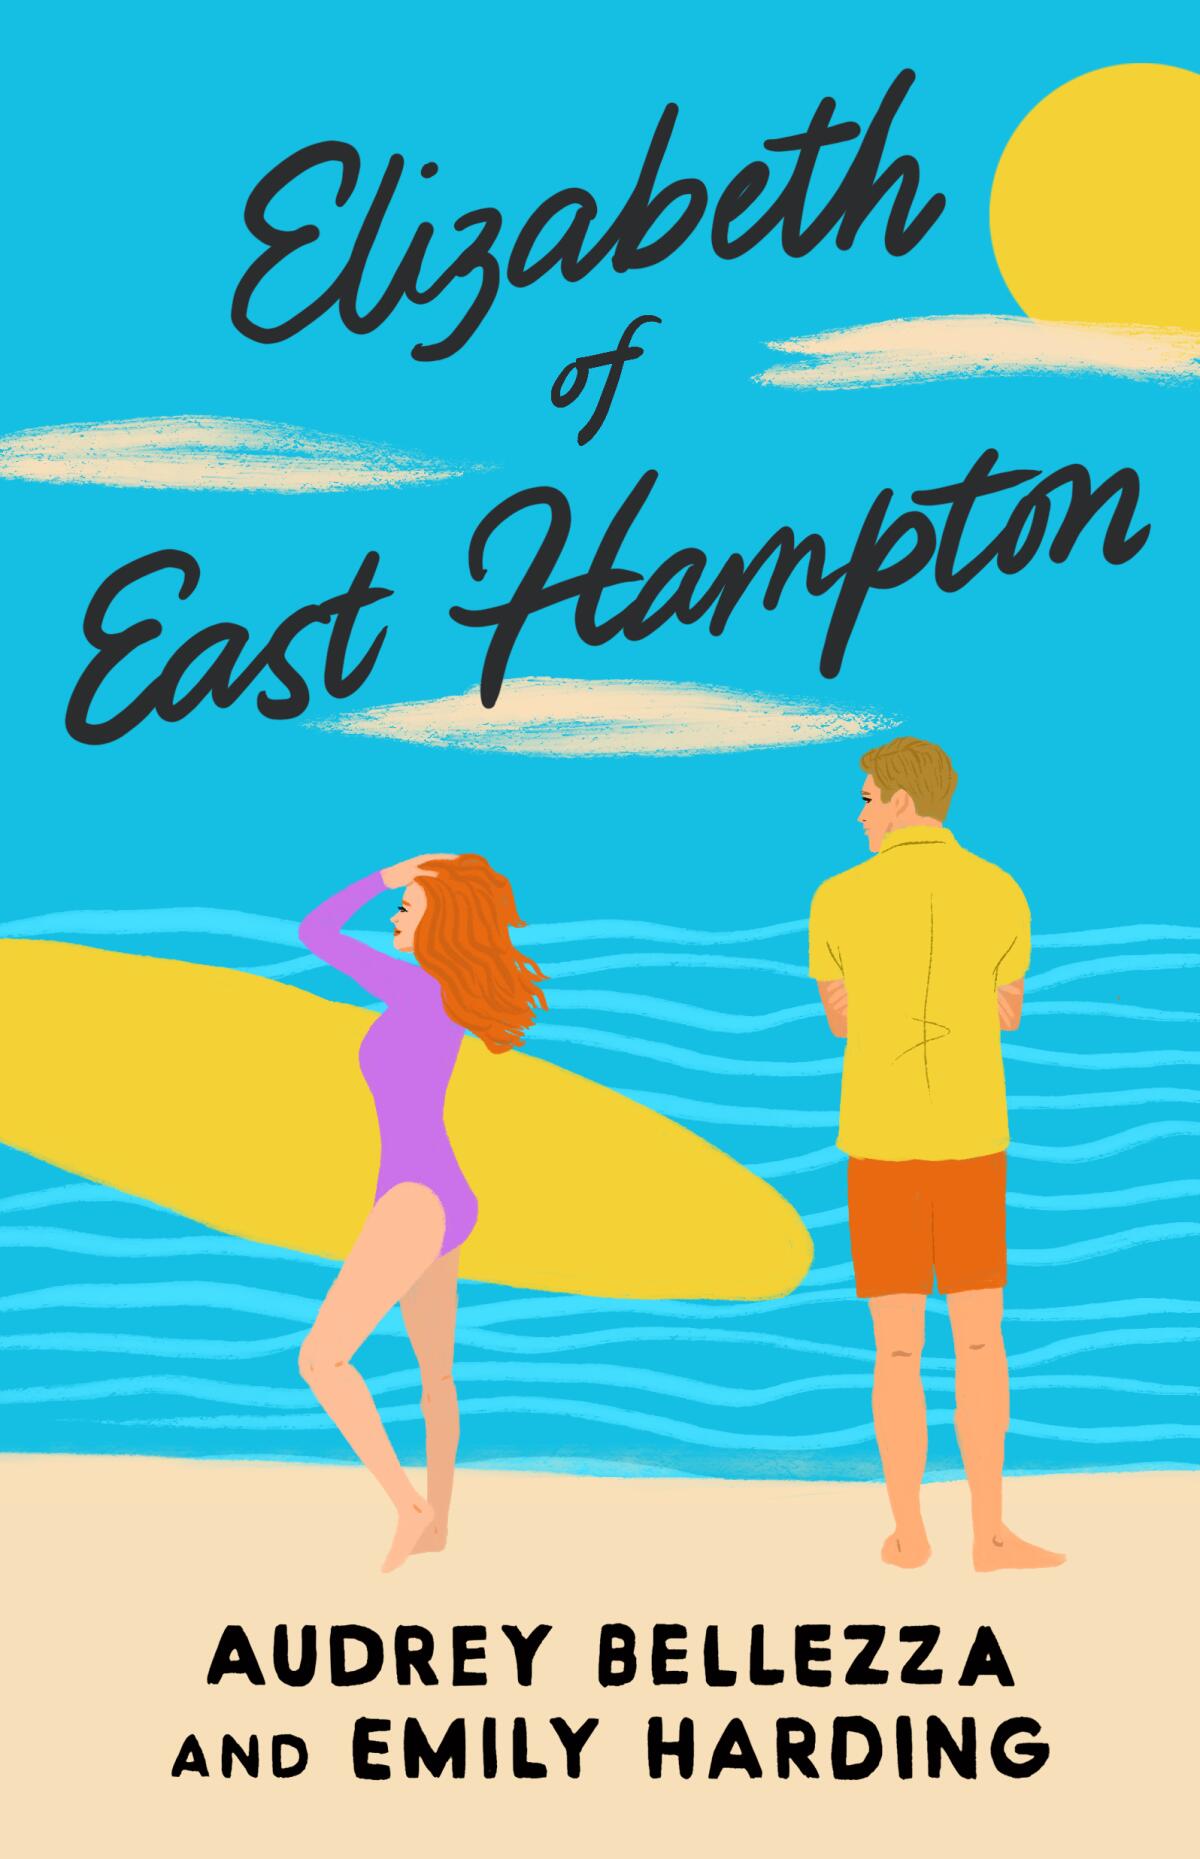 "Elizabeth of East Hampton" by Audrey Bellezza and Emily Harding